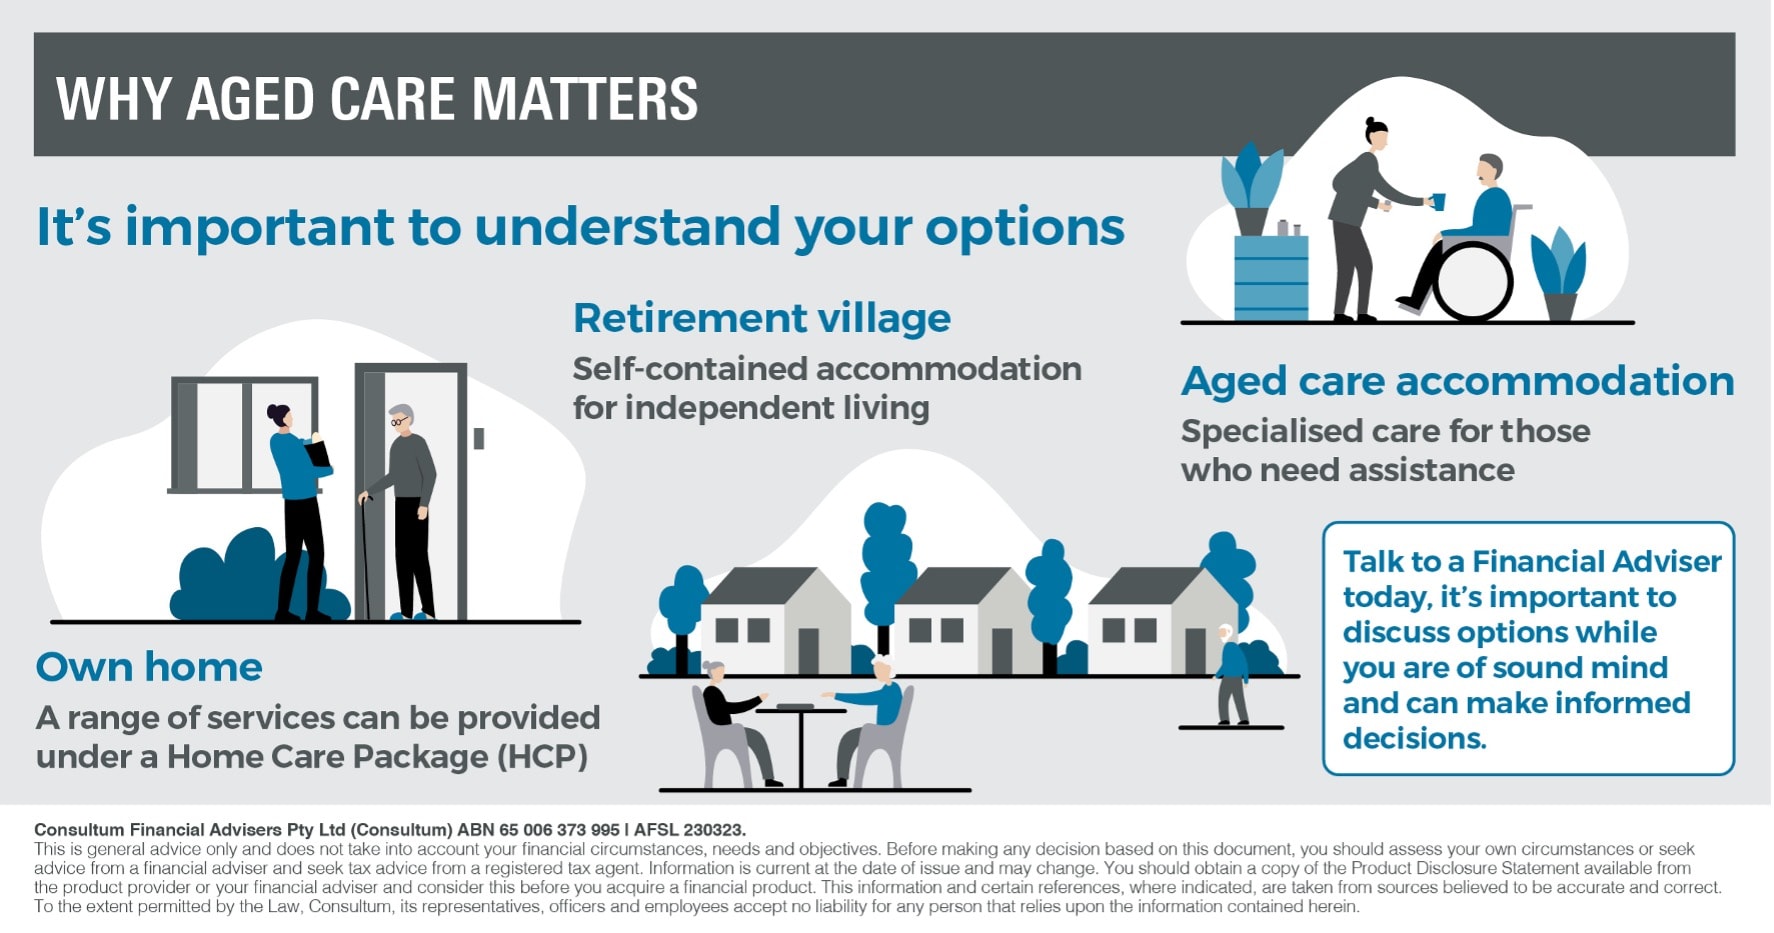 Why aged care matters